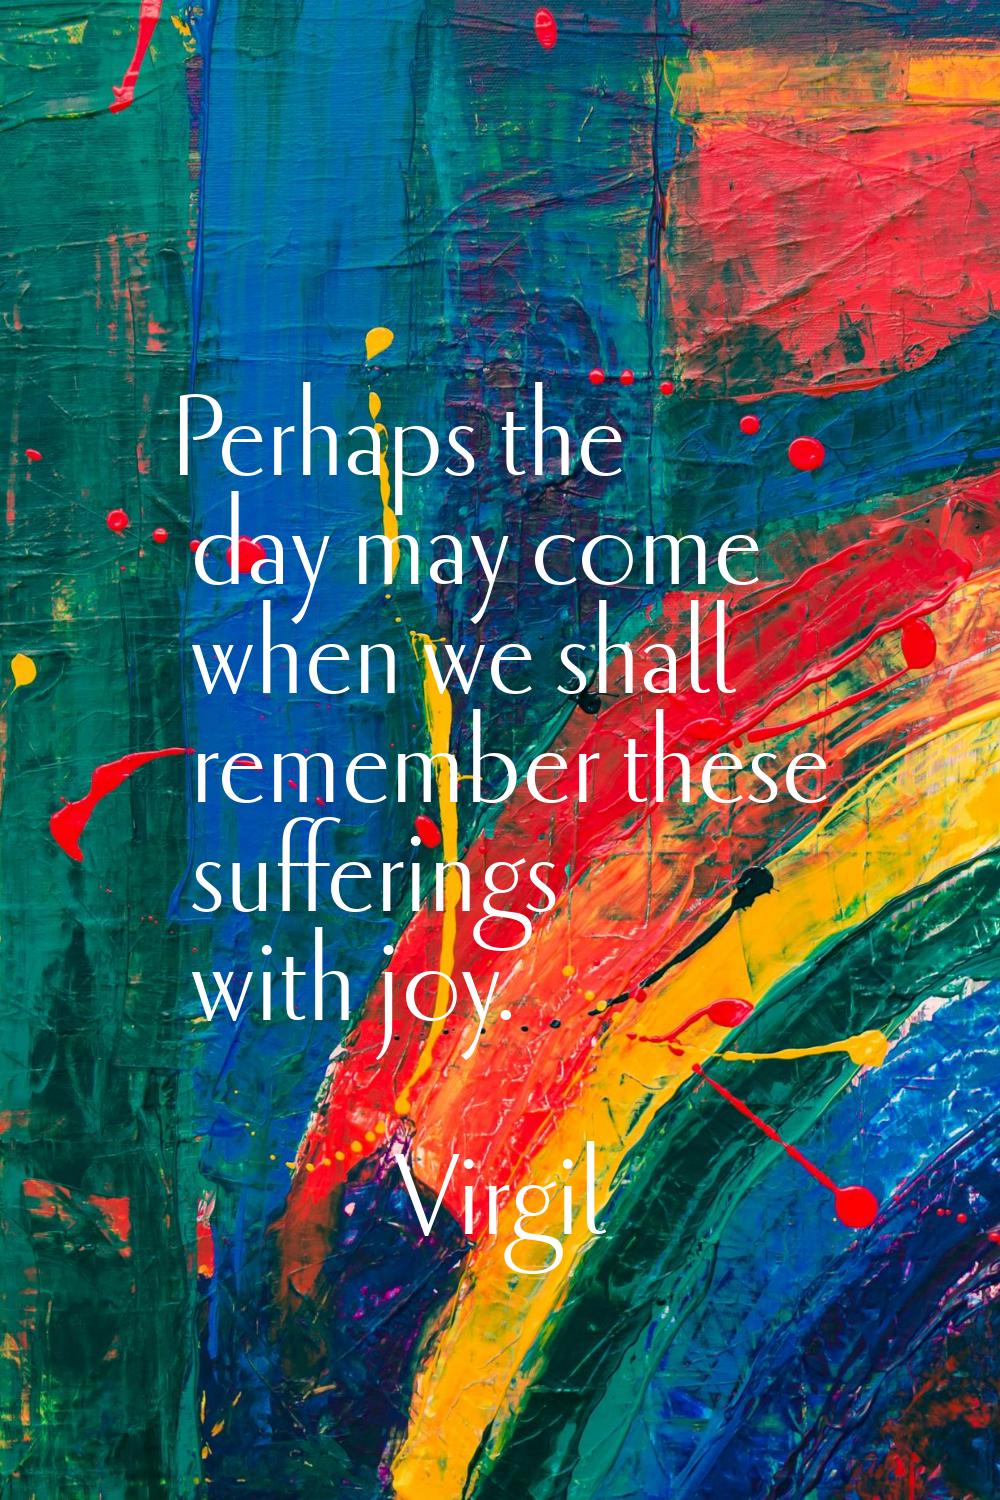 Perhaps the day may come when we shall remember these sufferings with joy.